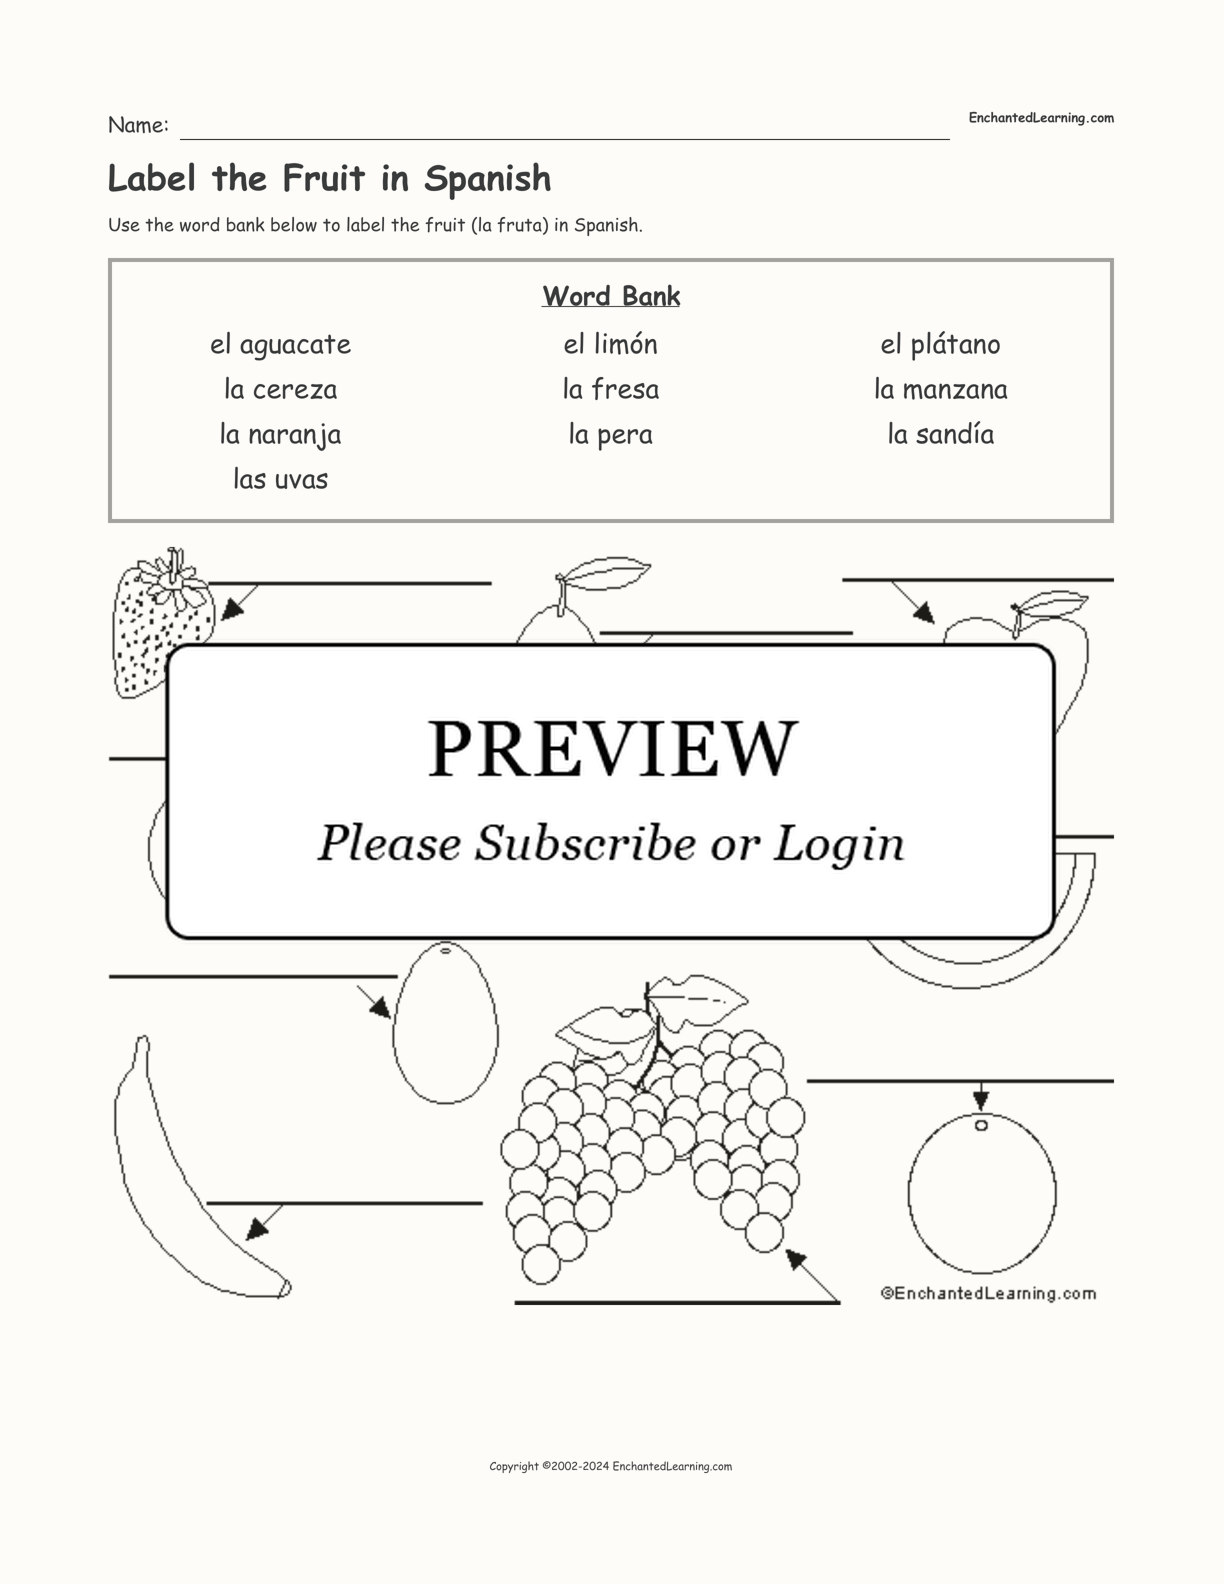 Label the Fruit in Spanish interactive worksheet page 1